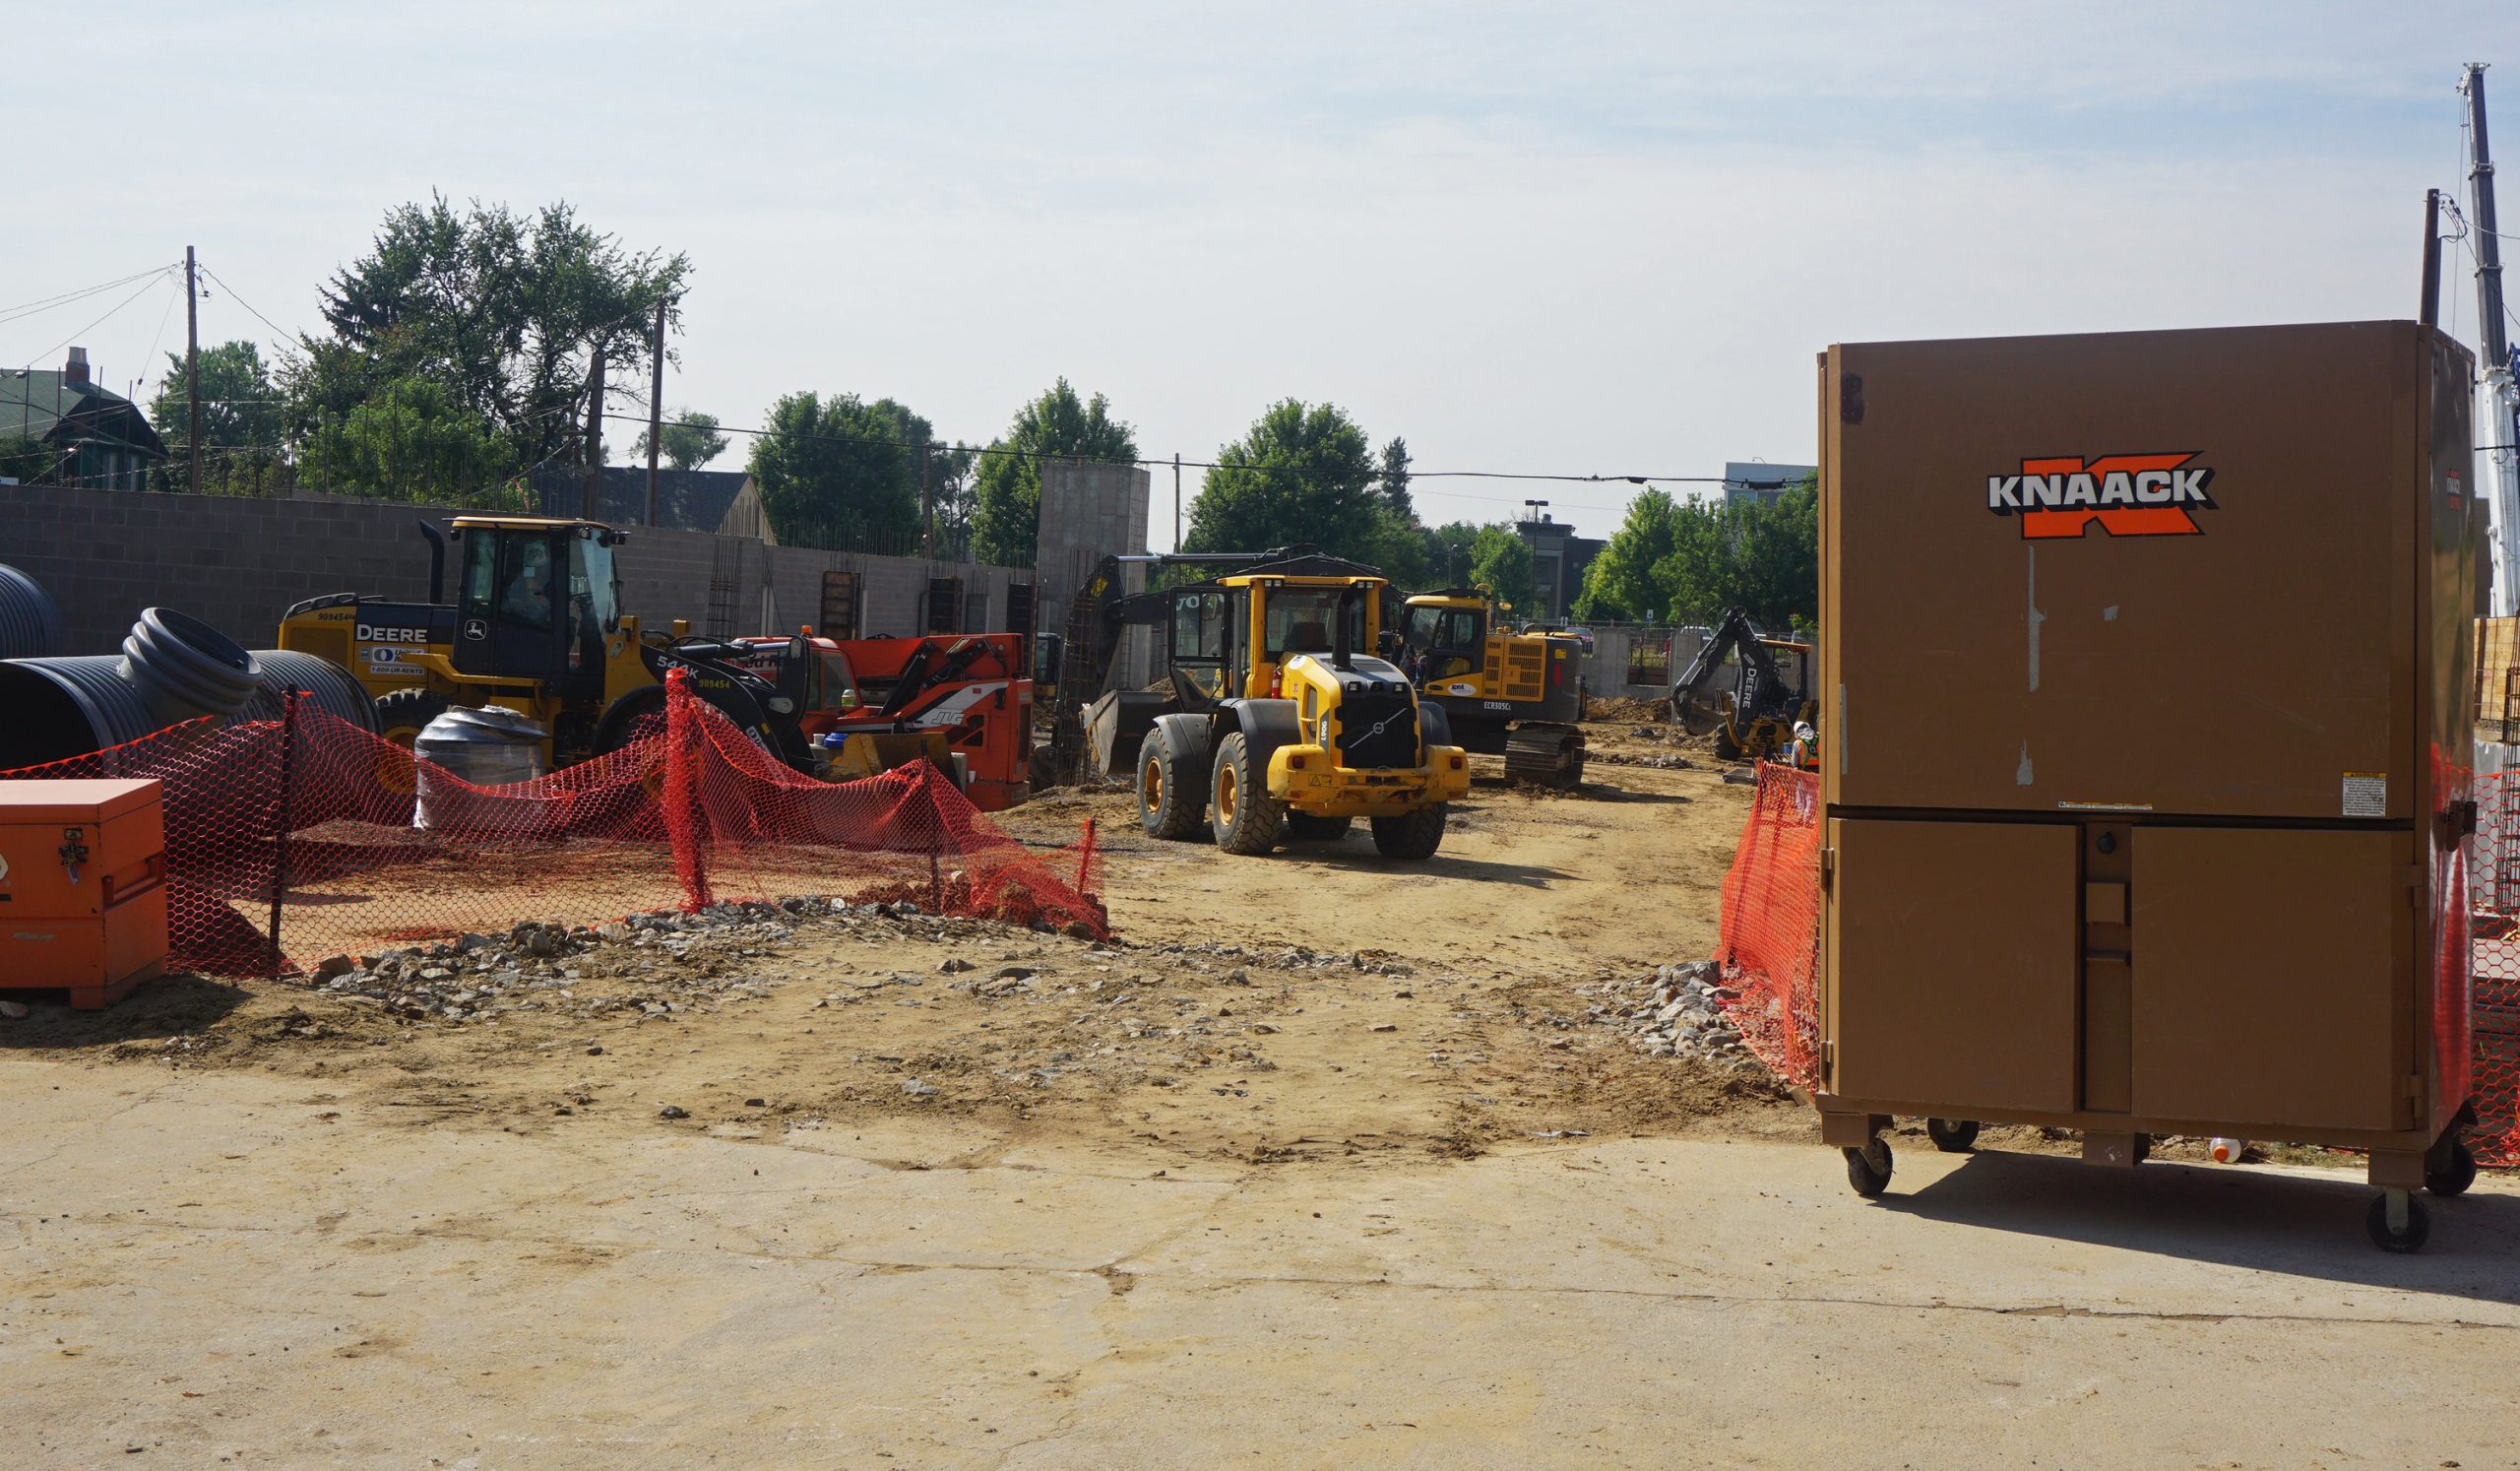 Across the street from the Twin 9s site, construction is underway on a large apartment complex. 